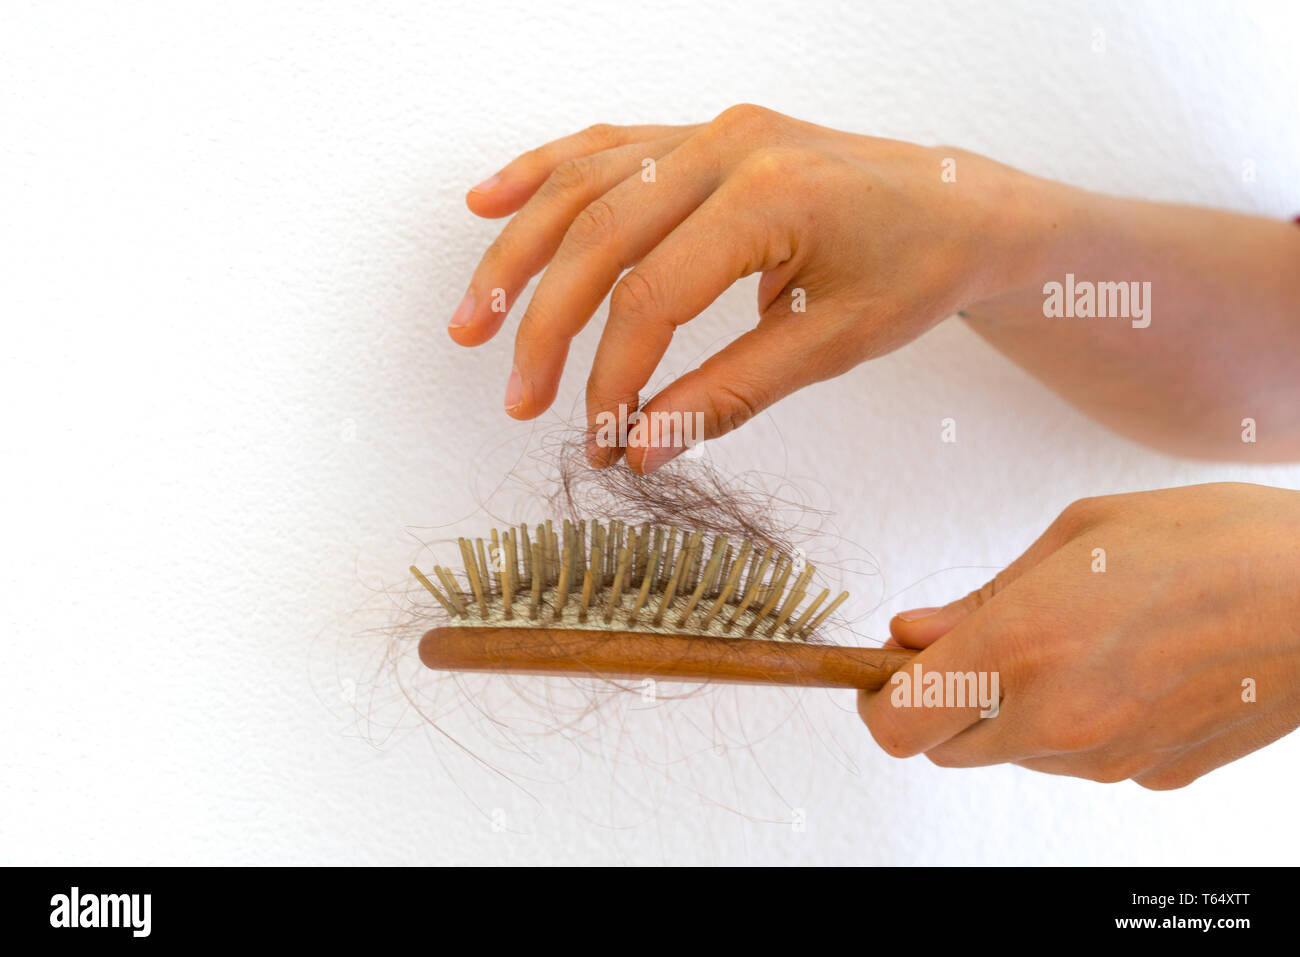 detail horizontal view of female hands picking hair out of wooden hair brush because of hair loss problem Stock Photo